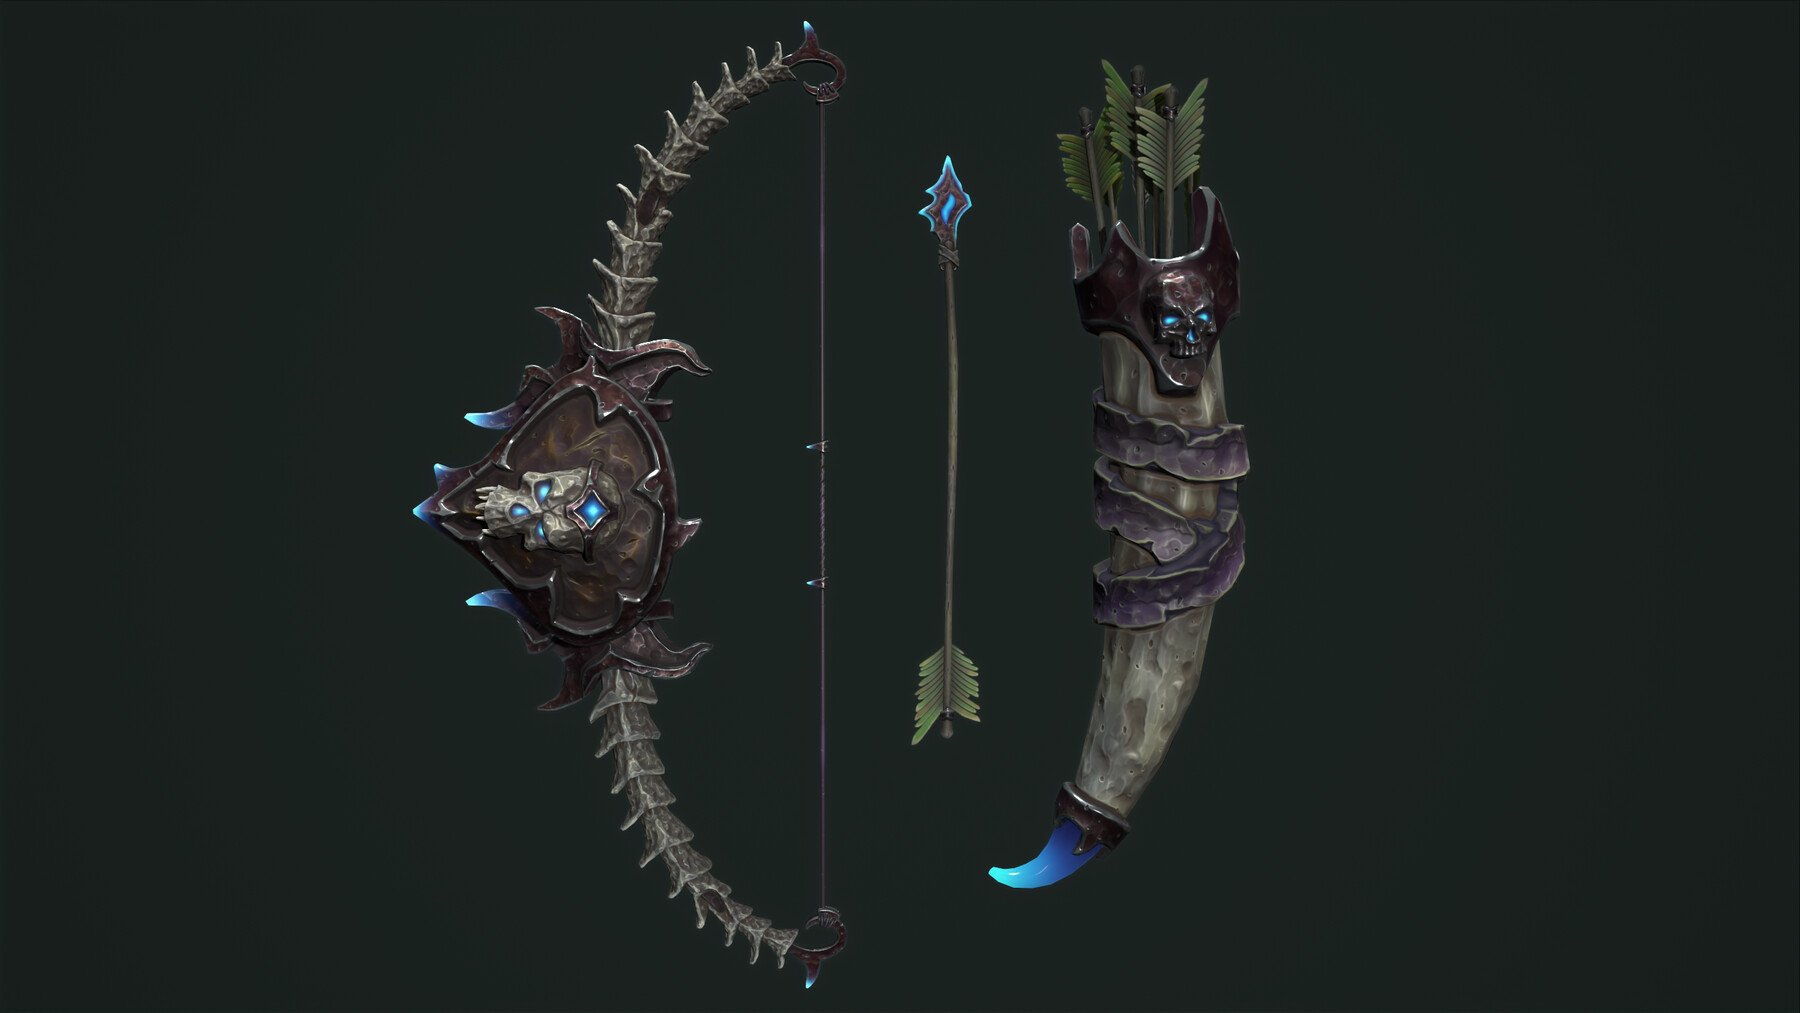 ArtStation - Undead bow and quiver | Game Assets